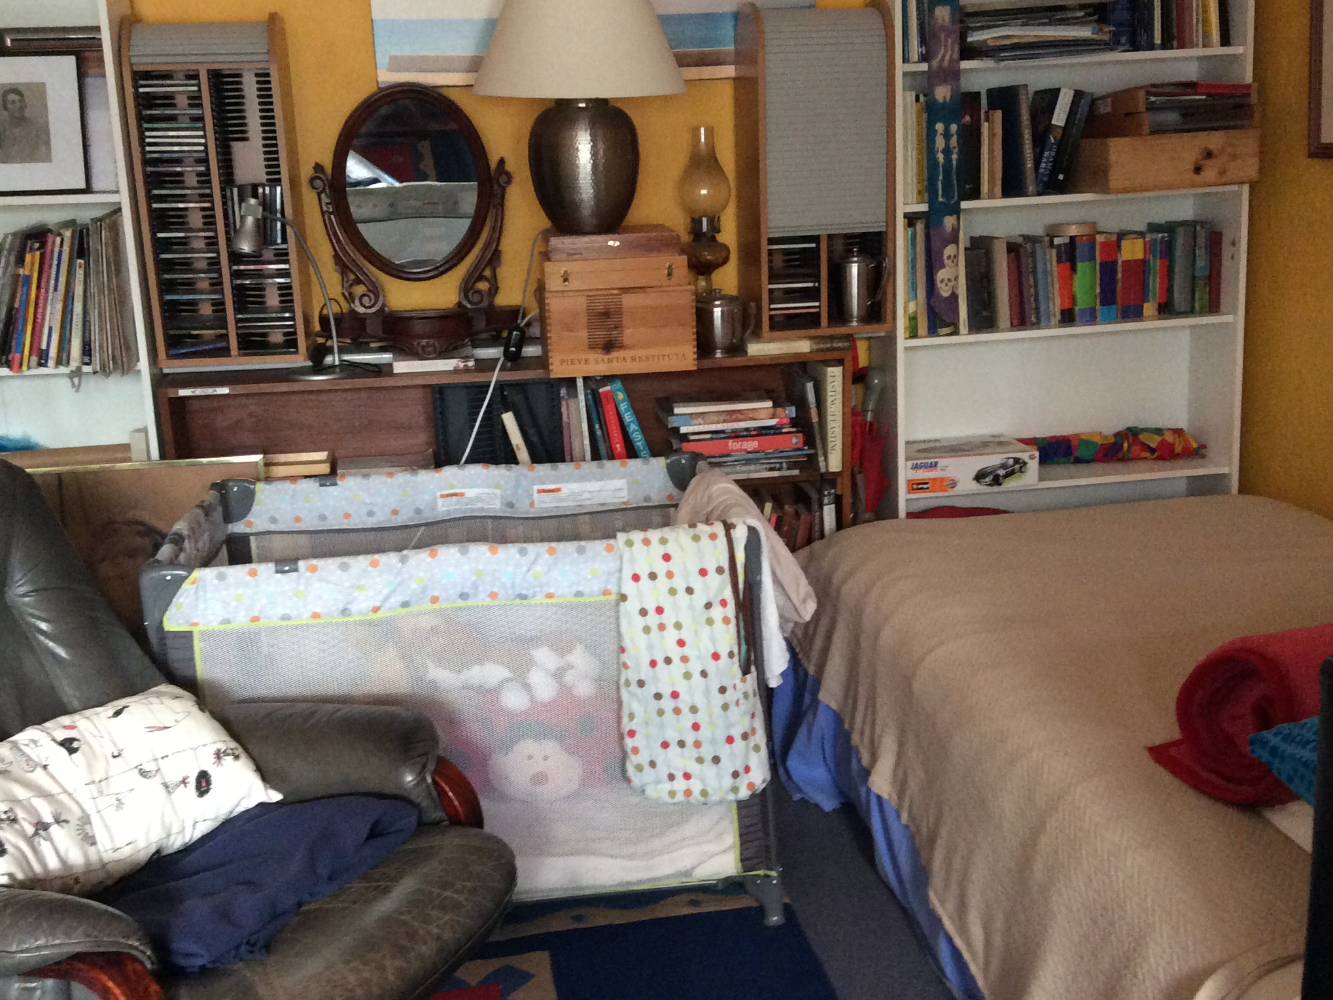 The busy study has an open fireplace, a single bed and room for a cot...and lots of books!